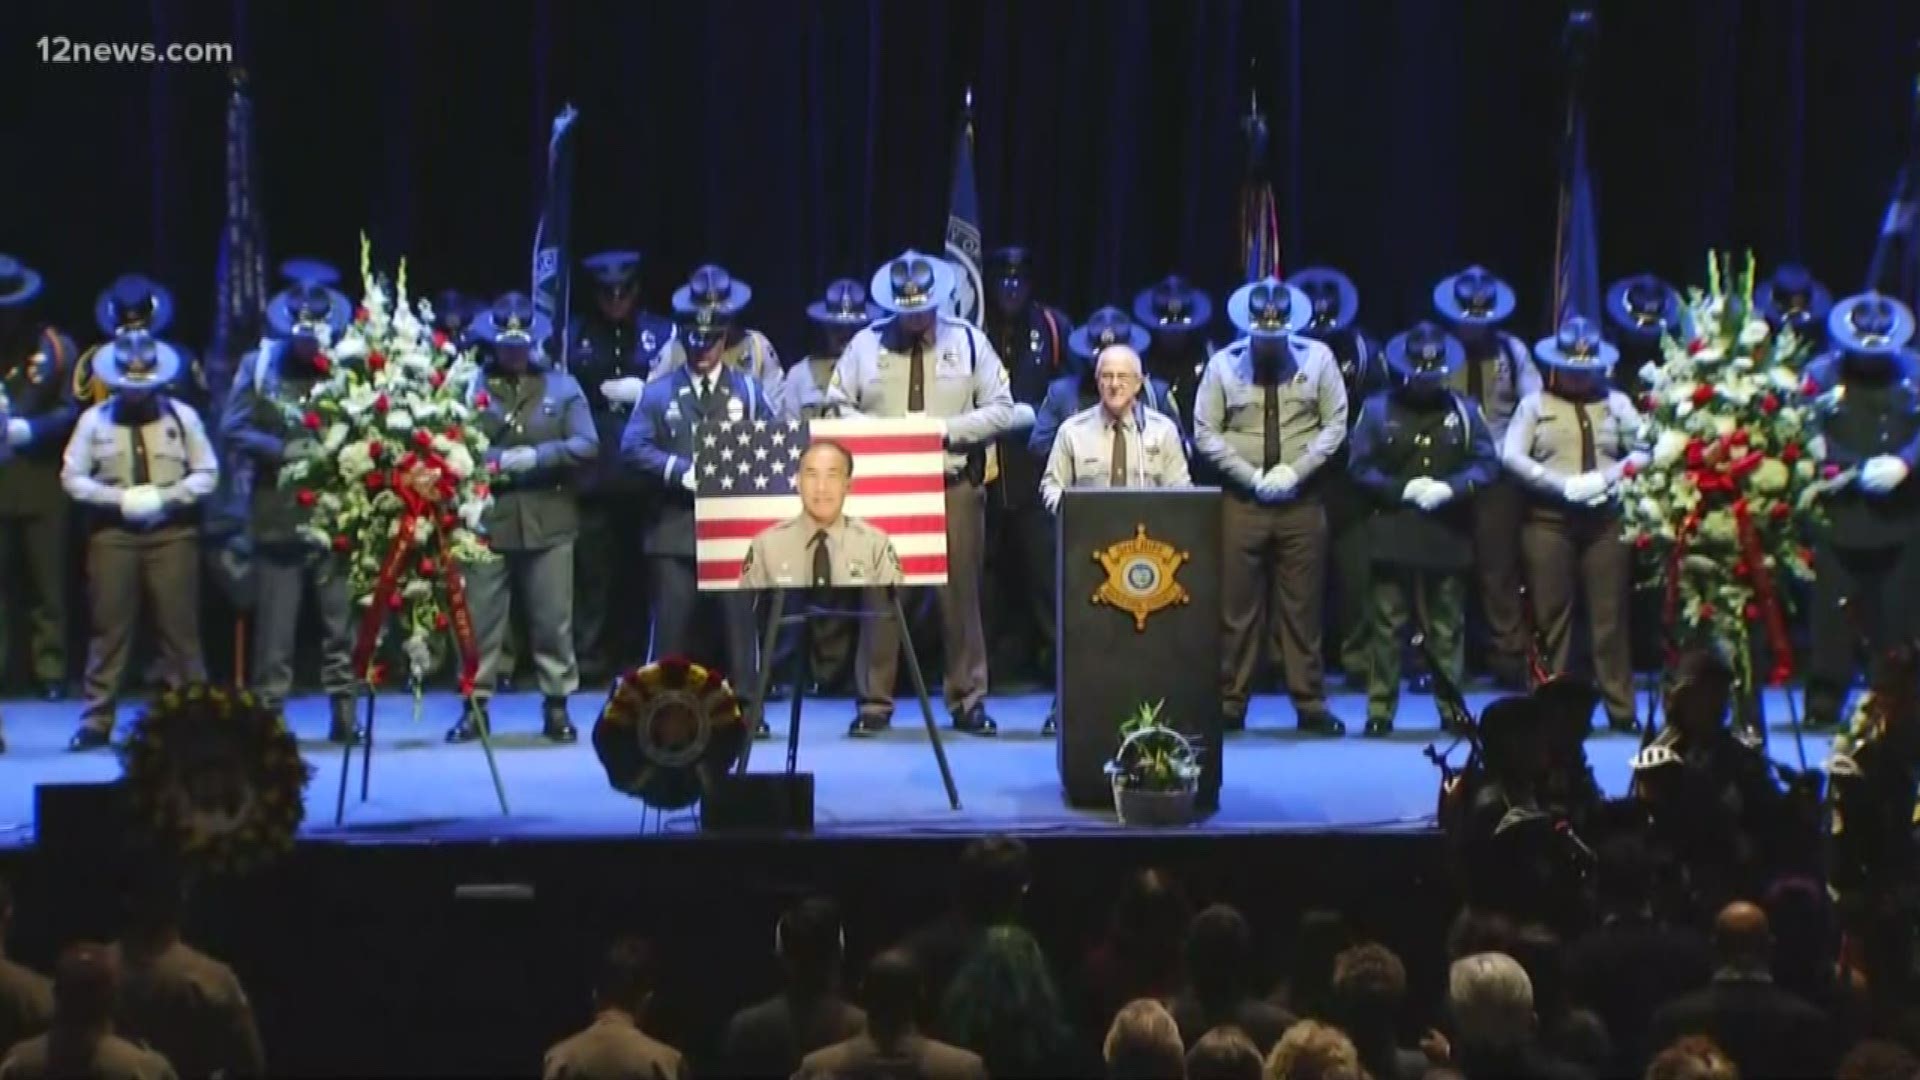 Family, friends, and public officials gathered at Comerica Theater to pay their respects to Maricopa County Detention Officer Gene Lee.